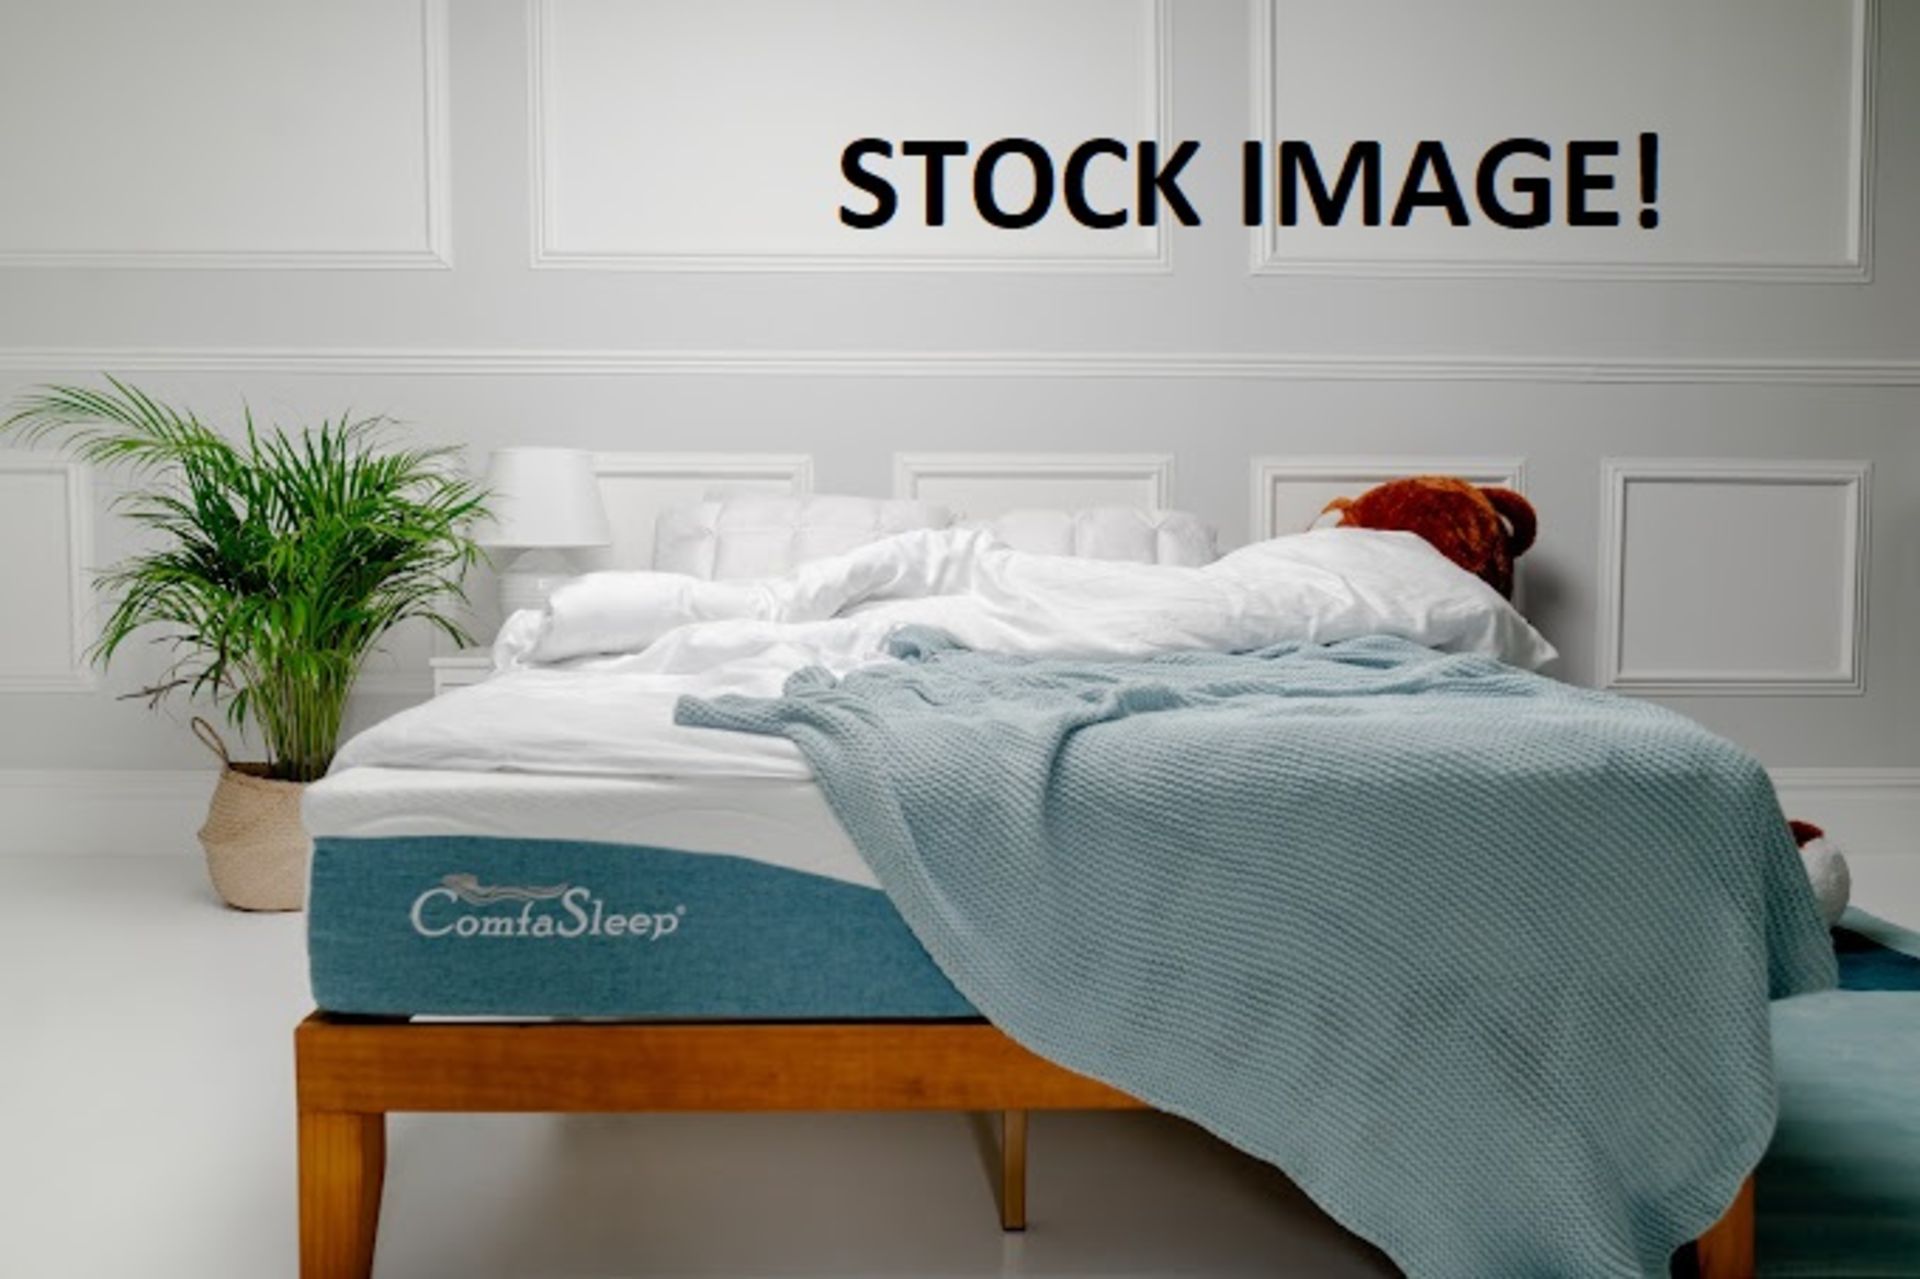 Over 100 Pieces of Ex-Display Hybrid Mattresses and Pillows | See description for breakdown